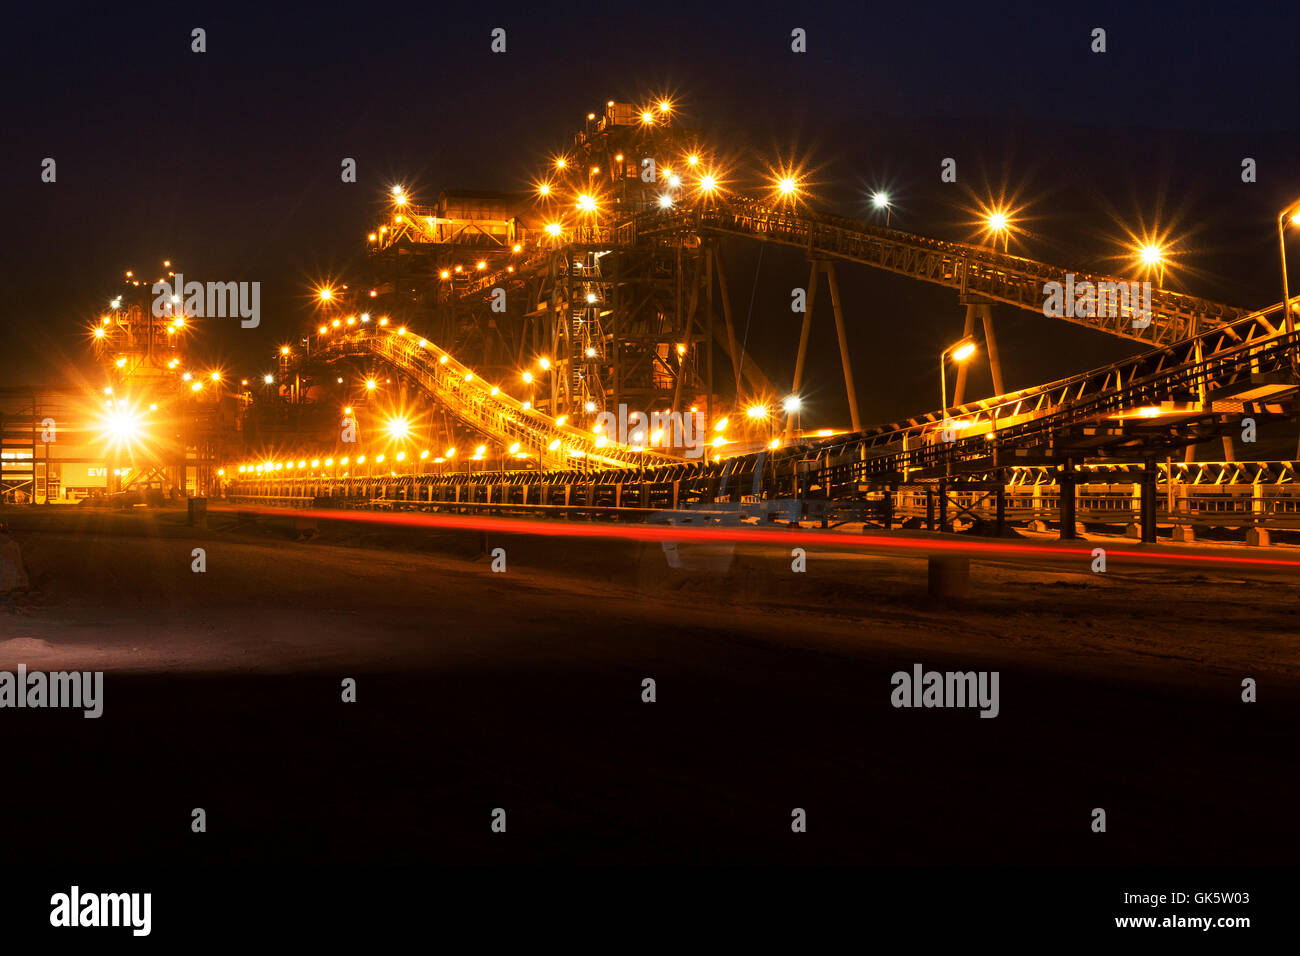 Mining operations for transporting and managing iron ore. Night view of new mine processing plant lit up and illuminated by car lights. West Africa. Stock Photo